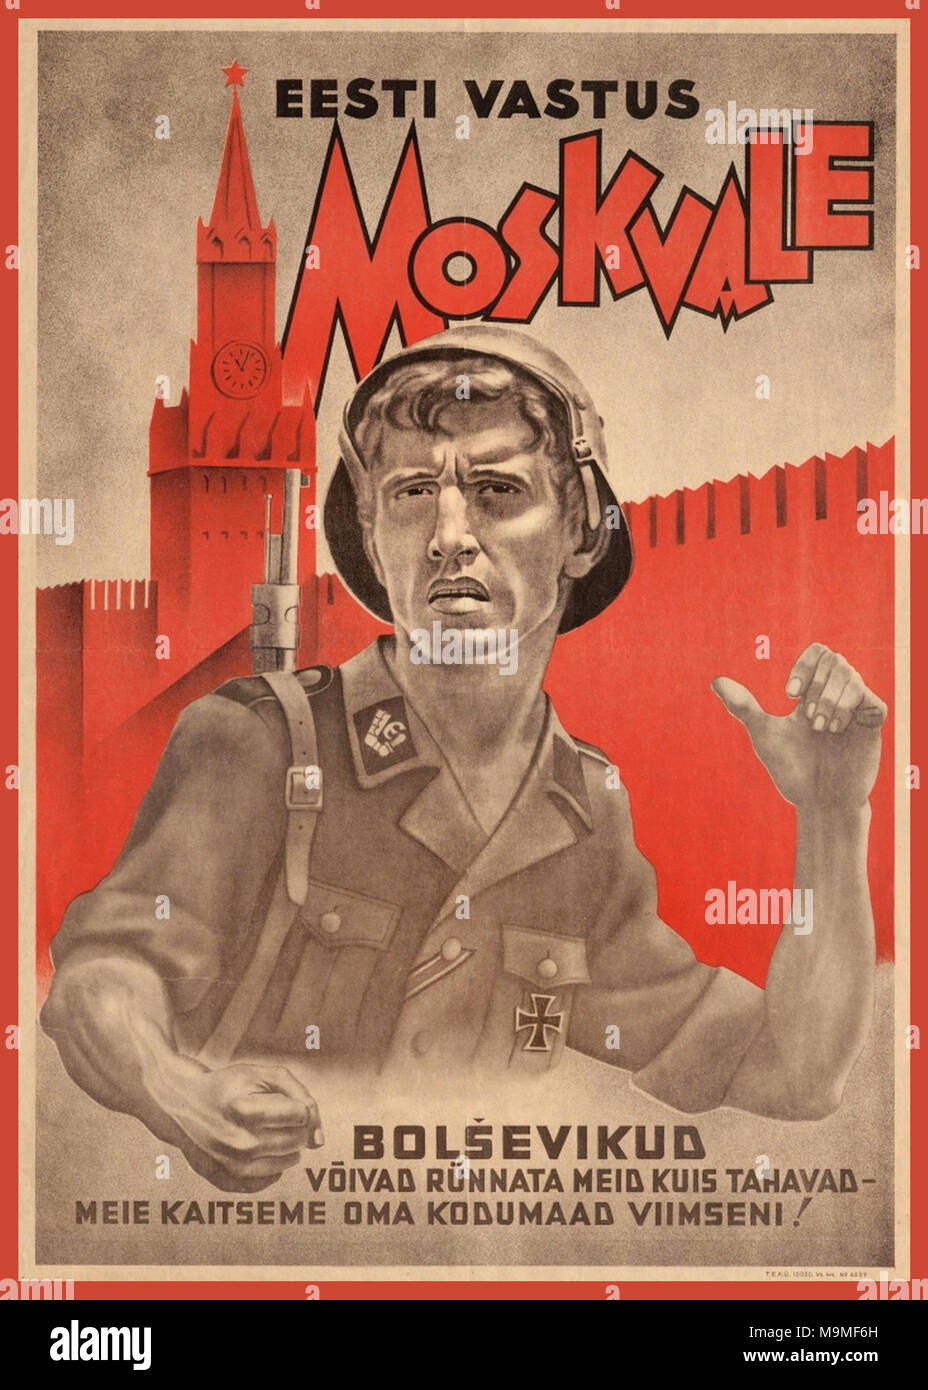 Vintage Estonia Propaganda Poster 1942-44  German sympathising Estonian Response to Moscow. Bolscheviks CanTry to Make Us Quit  – We Protect Our Homeland For The Last! Stock Photo